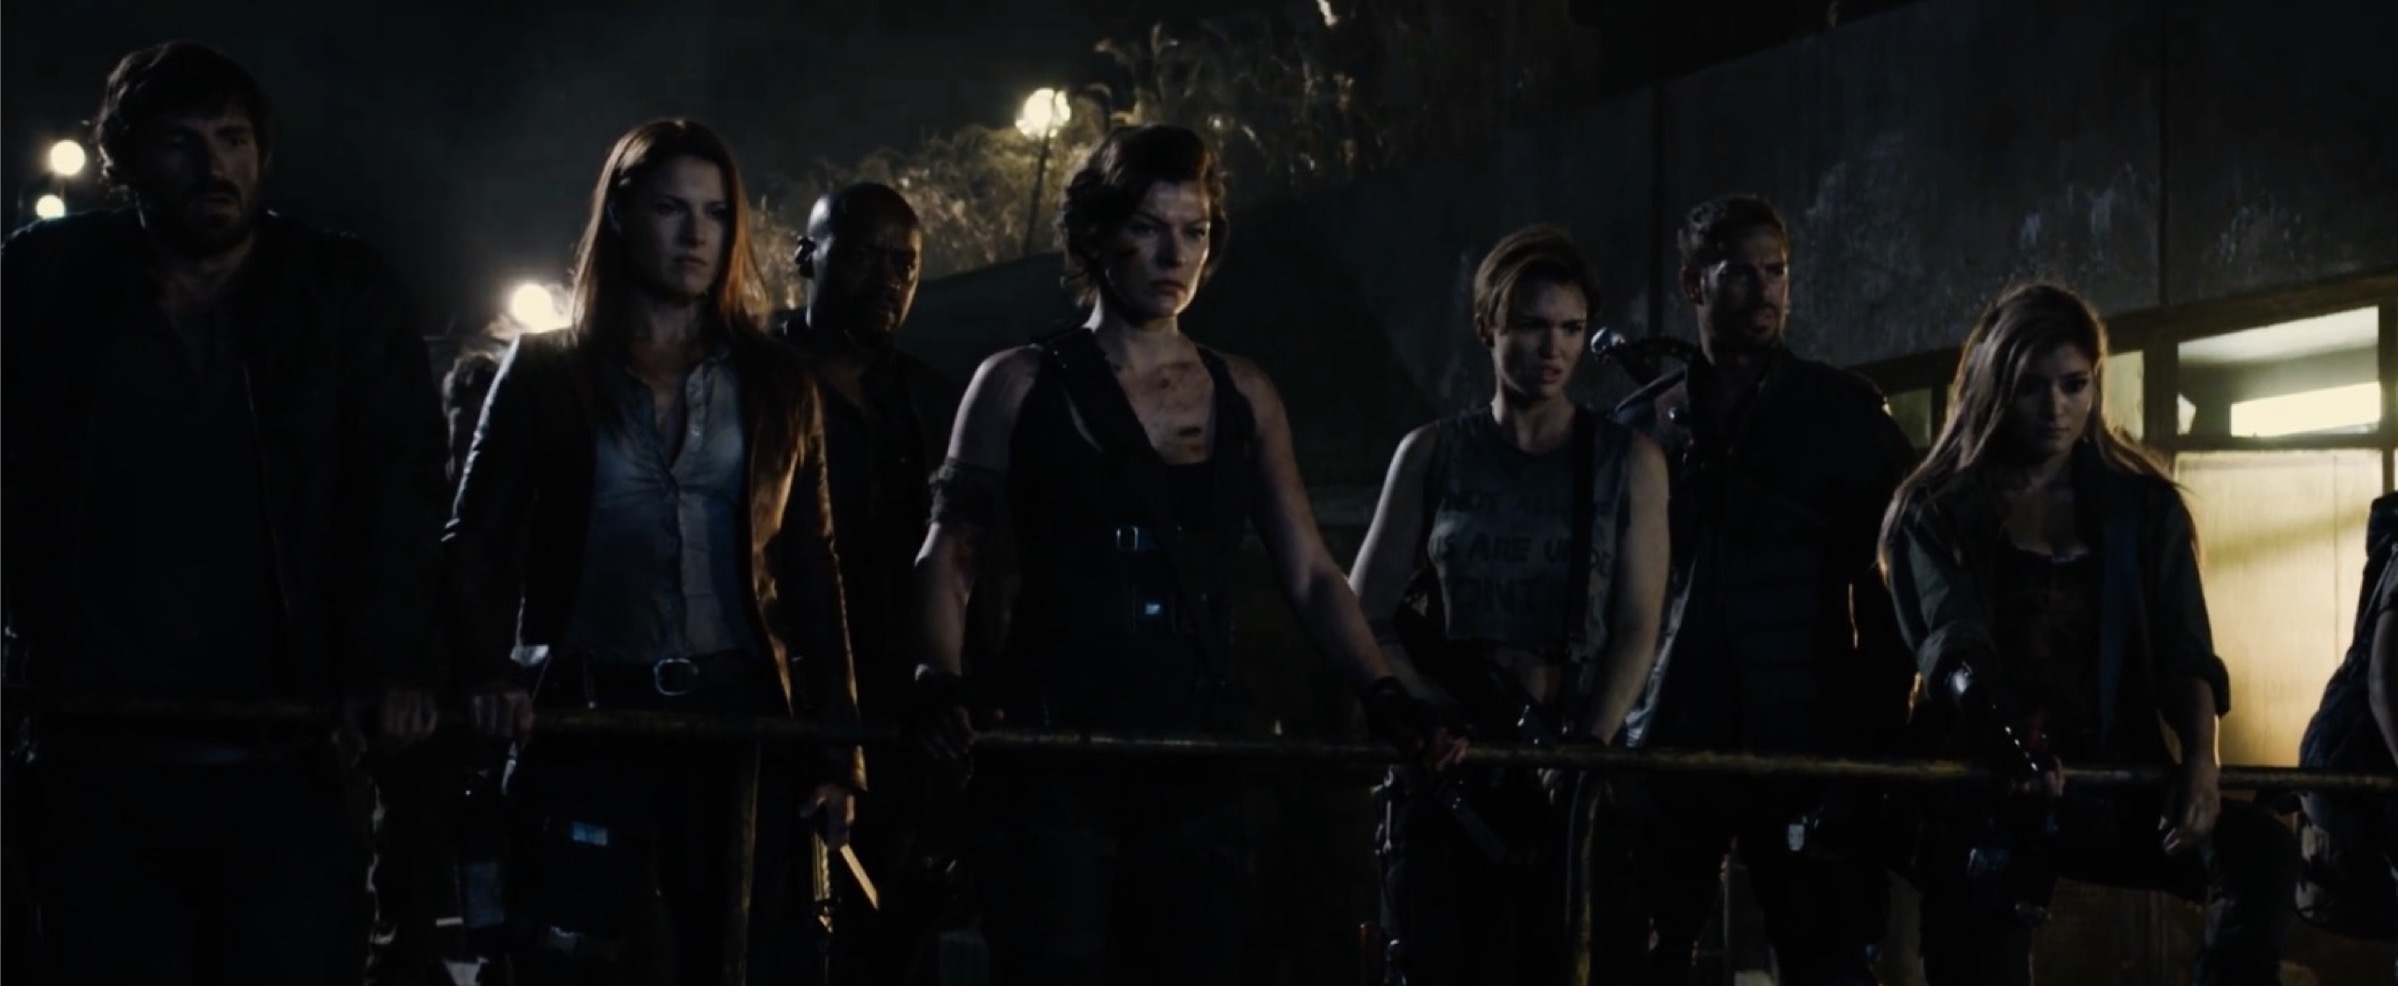 Rola makes Hollywood debut in 'Resident Evil: The Final Chapter' - Japan  Today